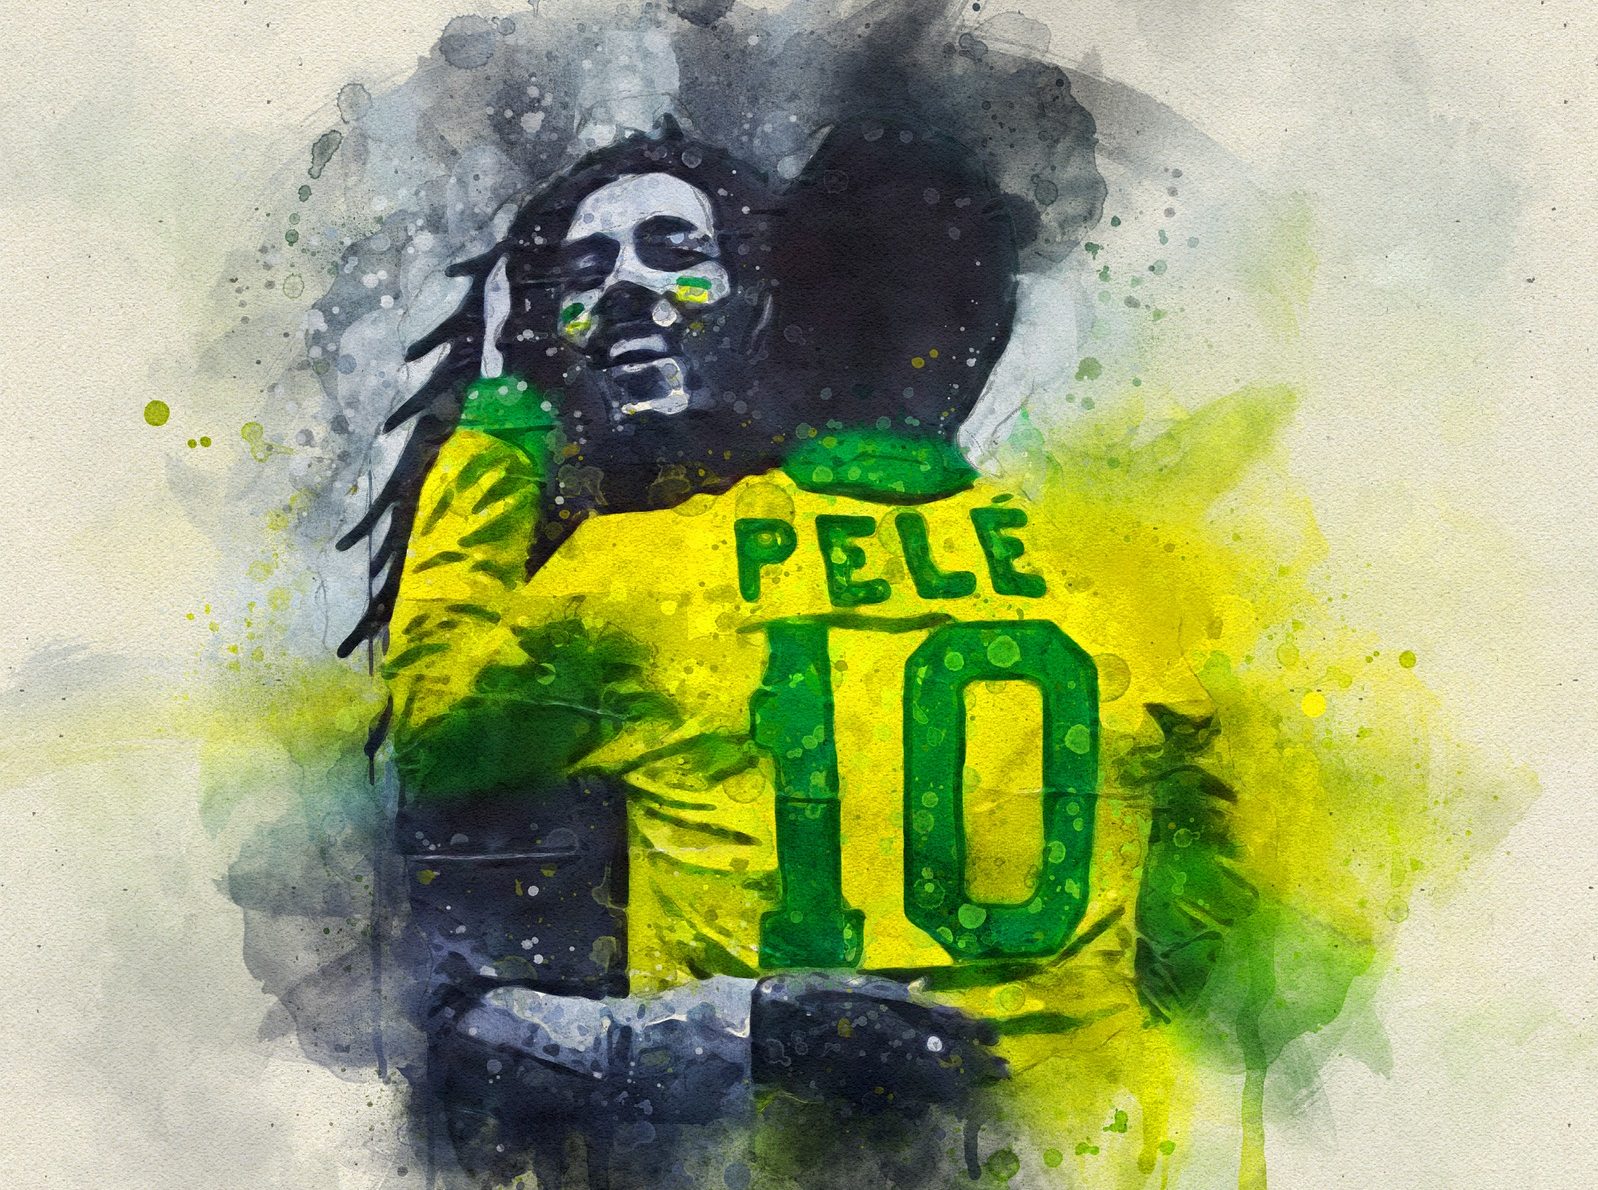 In an article about the legacy of Pelé a mural of the soccer player embracing Bob Marley in his signature yellow jersey.